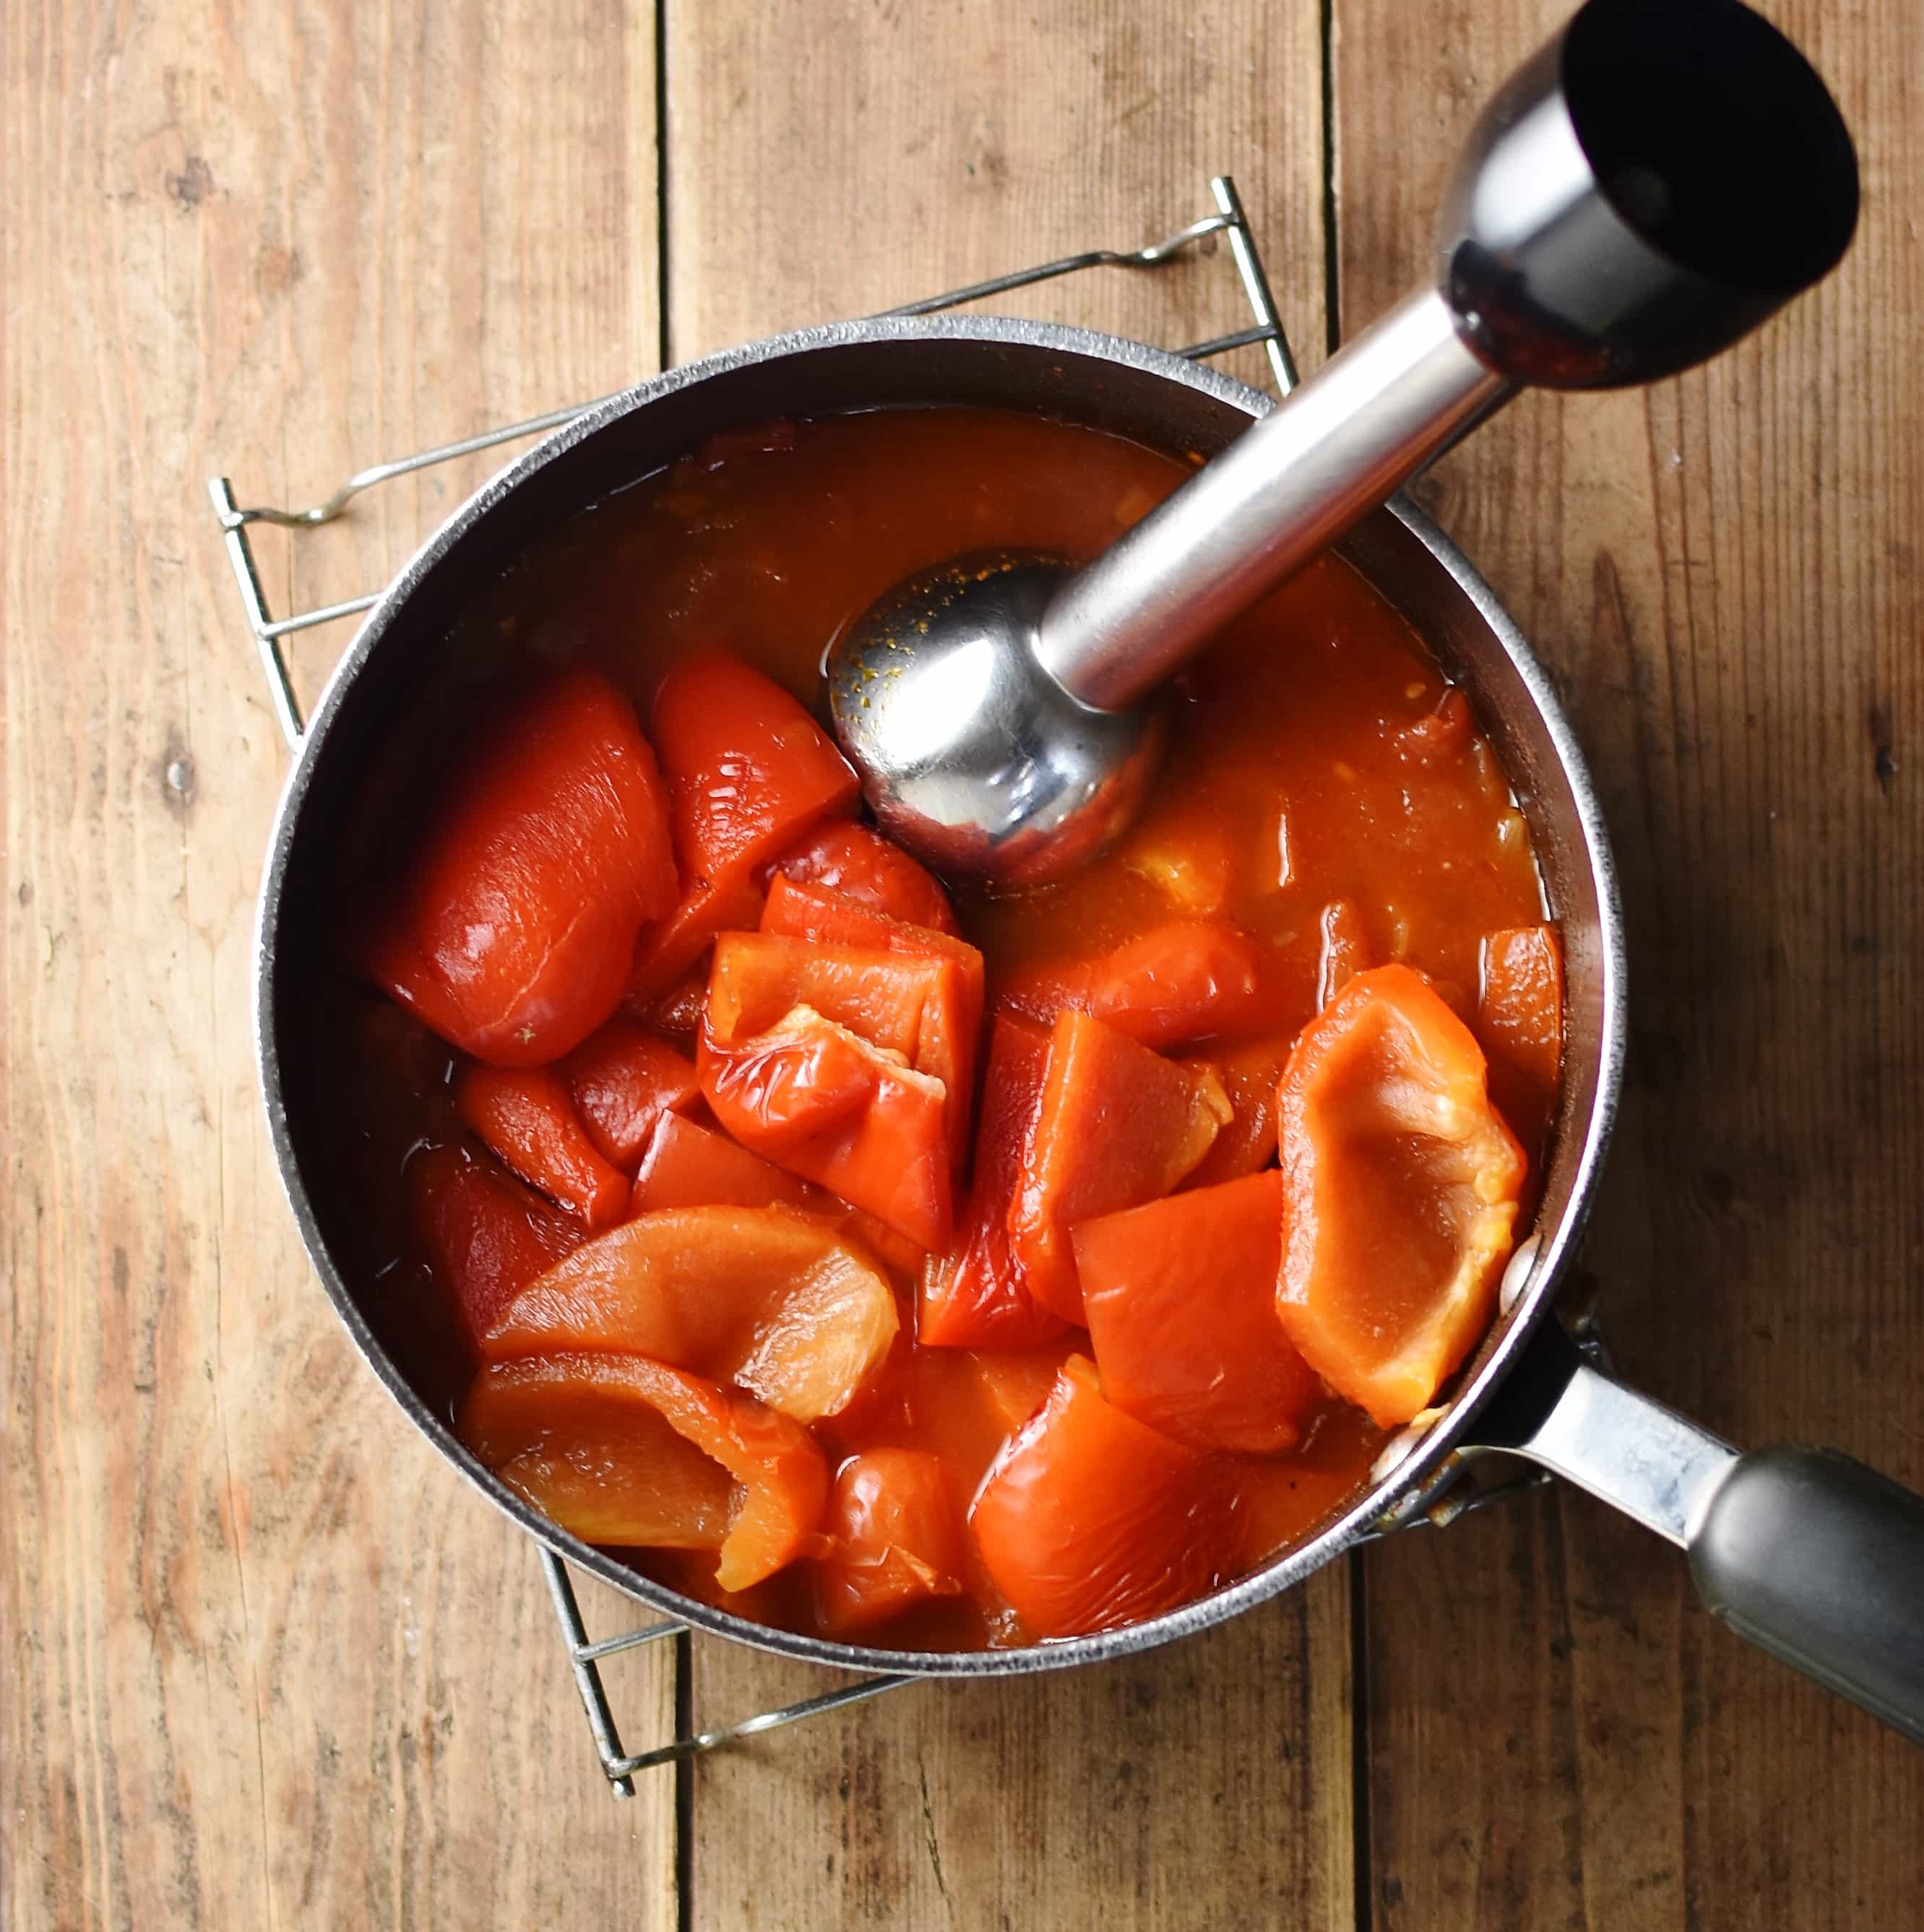 Roasted peppers and tomatoes in large pot with hand blender